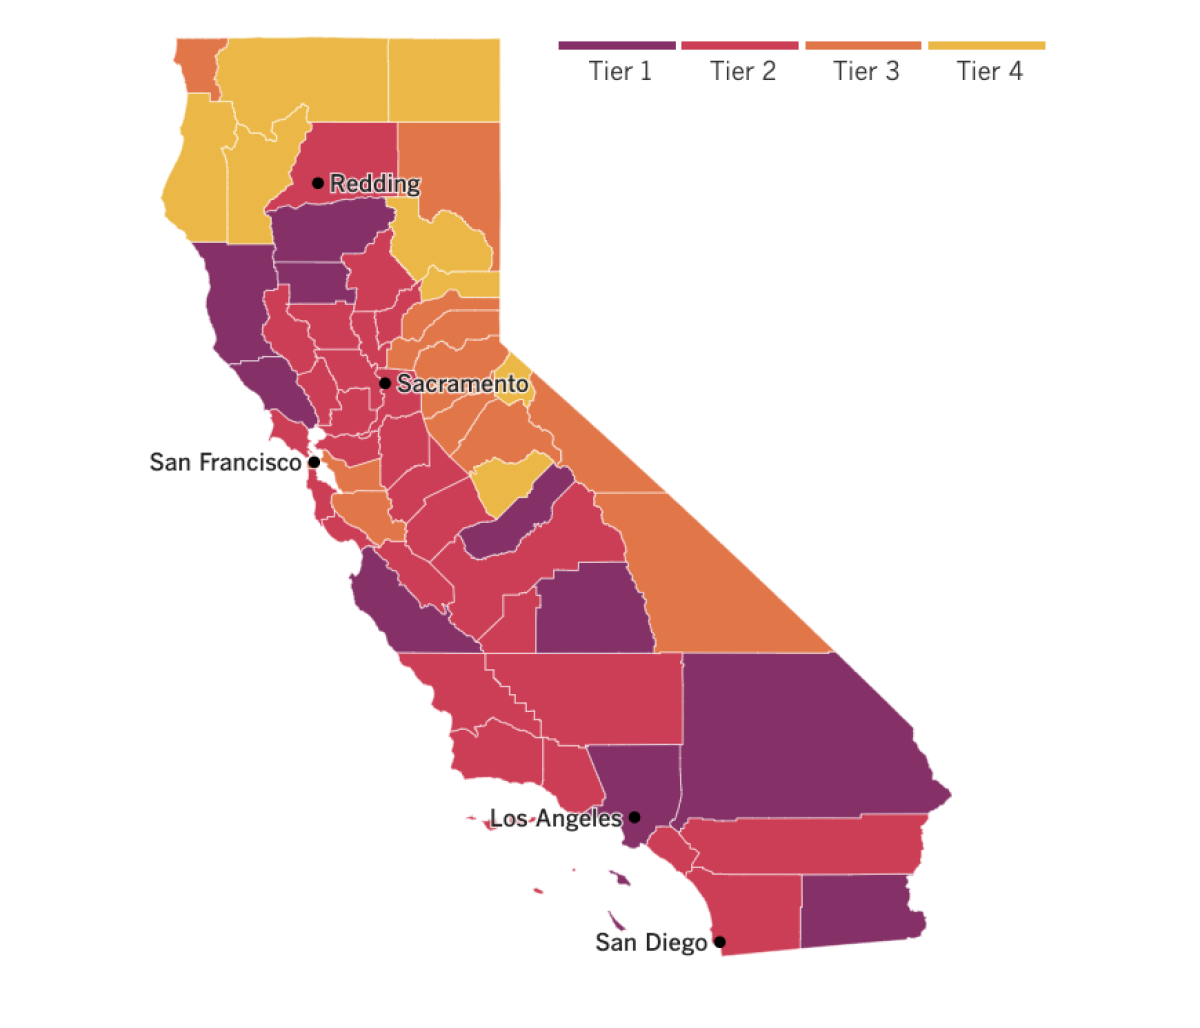 A map of California showing the tiers to which counties have been assigned based on local levels of coronavirus risk.